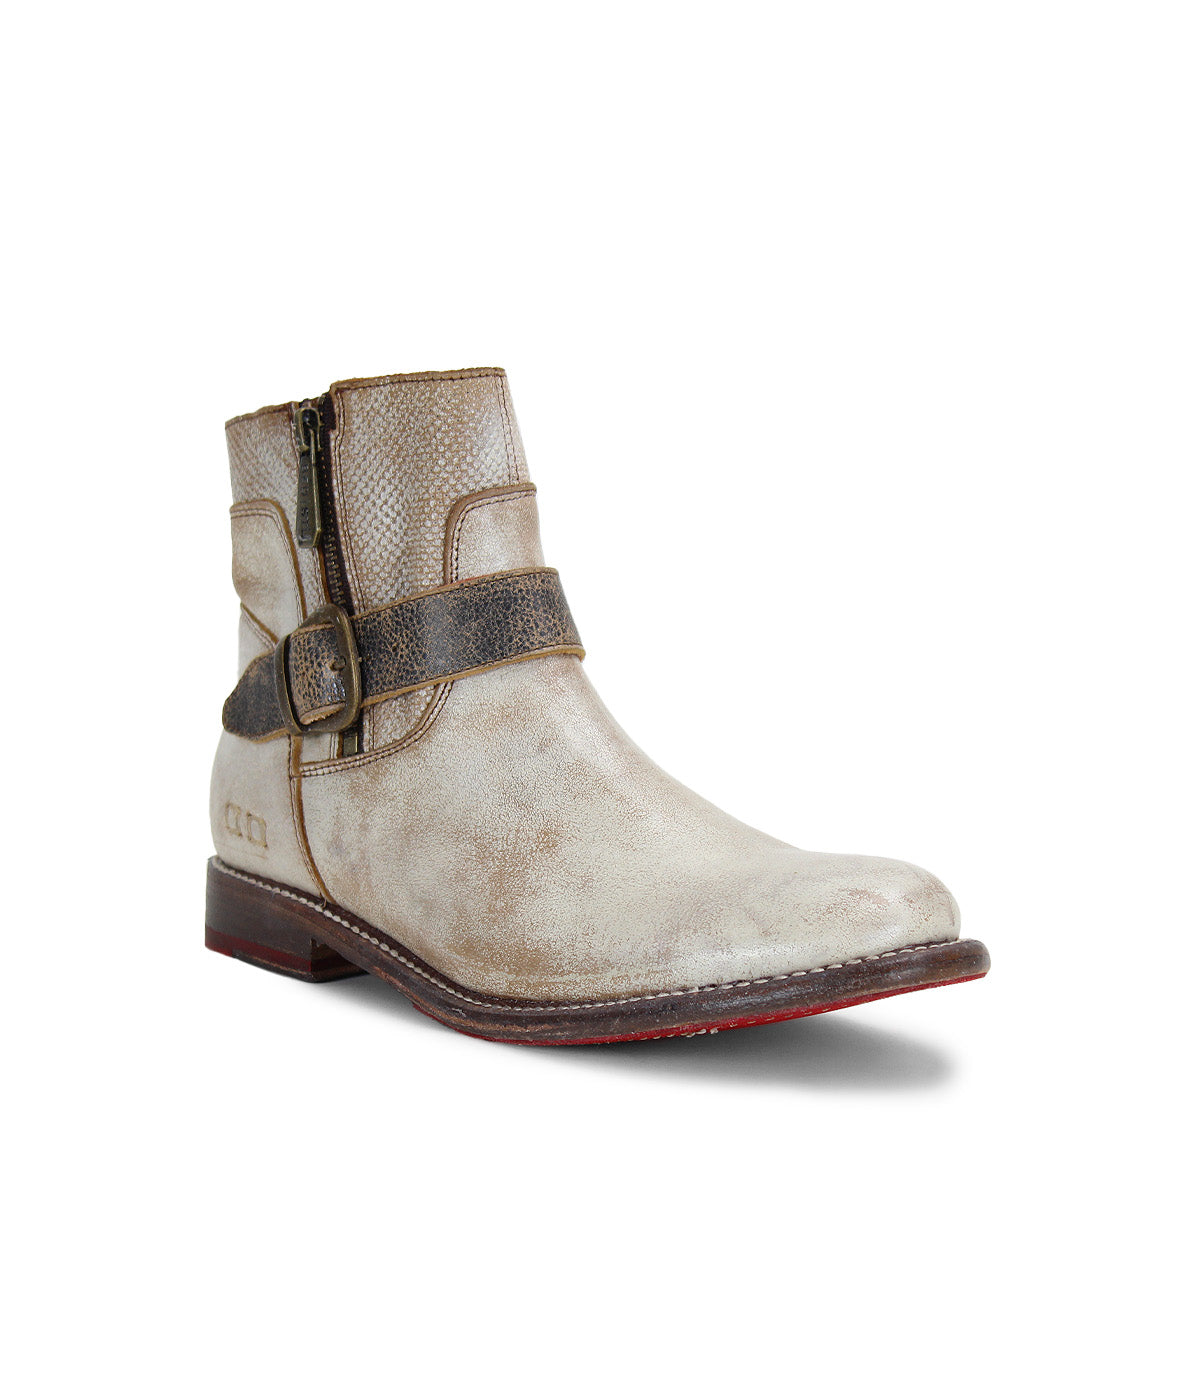 A women's white leather ankle boot with a buckle, the Becca by Bed Stu.